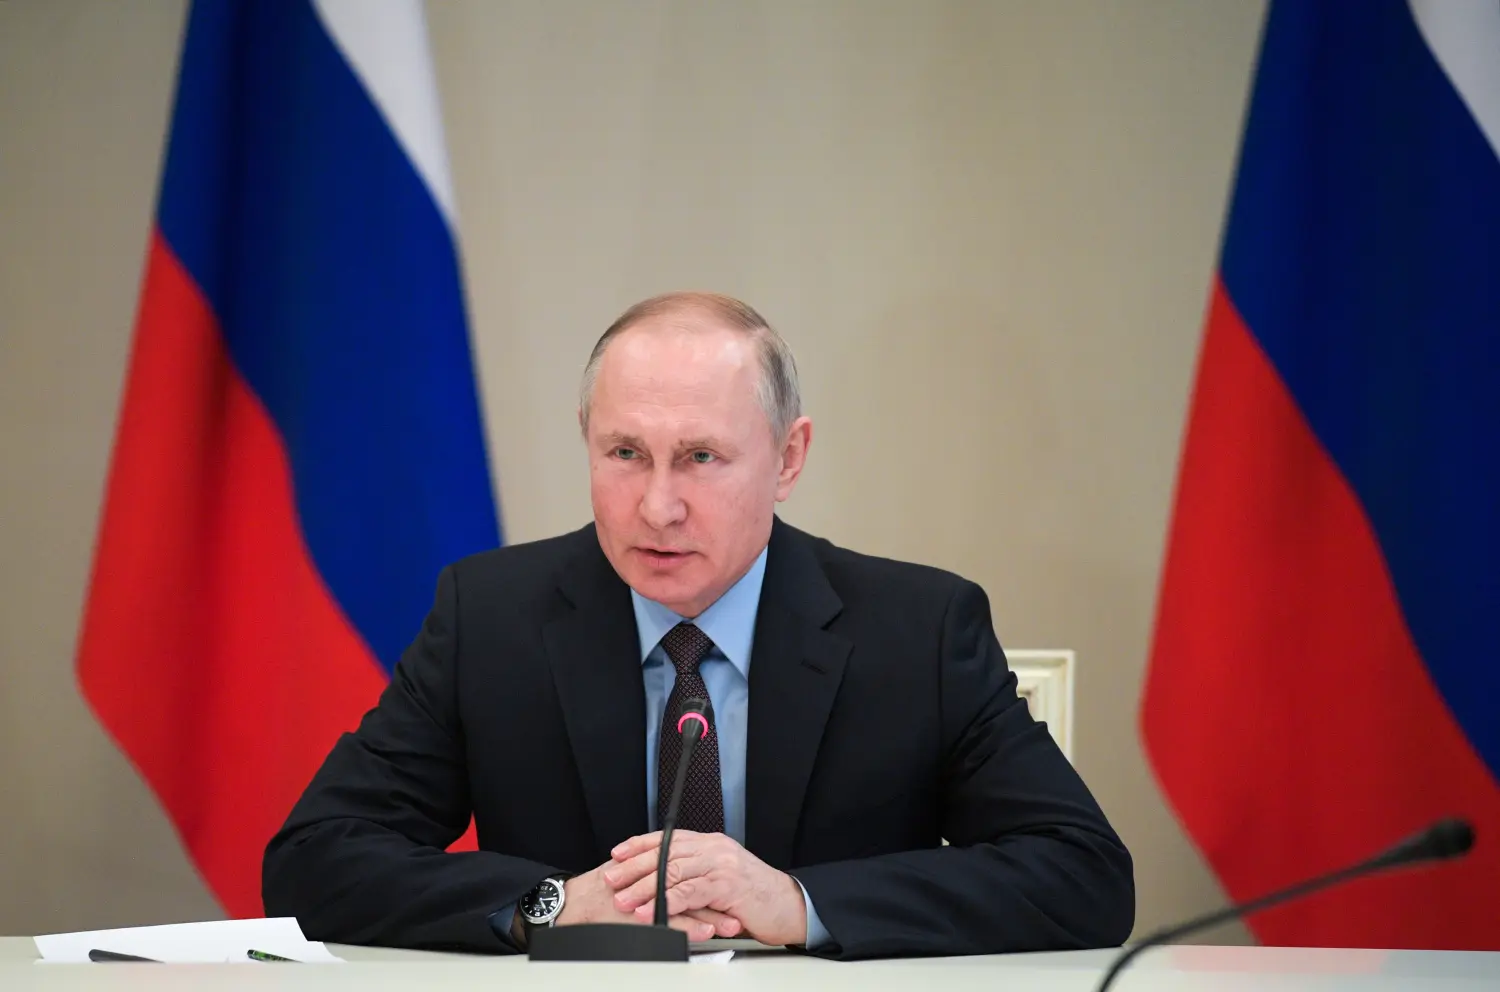 Russian President Vladimir Putin chairs a meeting at Vnukovo II government airport outside Moscow, Russia March 1, 2020. Sputnik/Alexei Druzhinin/Kremlin via REUTERS ATTENTION EDITORS - THIS IMAGE WAS PROVIDED BY A THIRD PARTY.